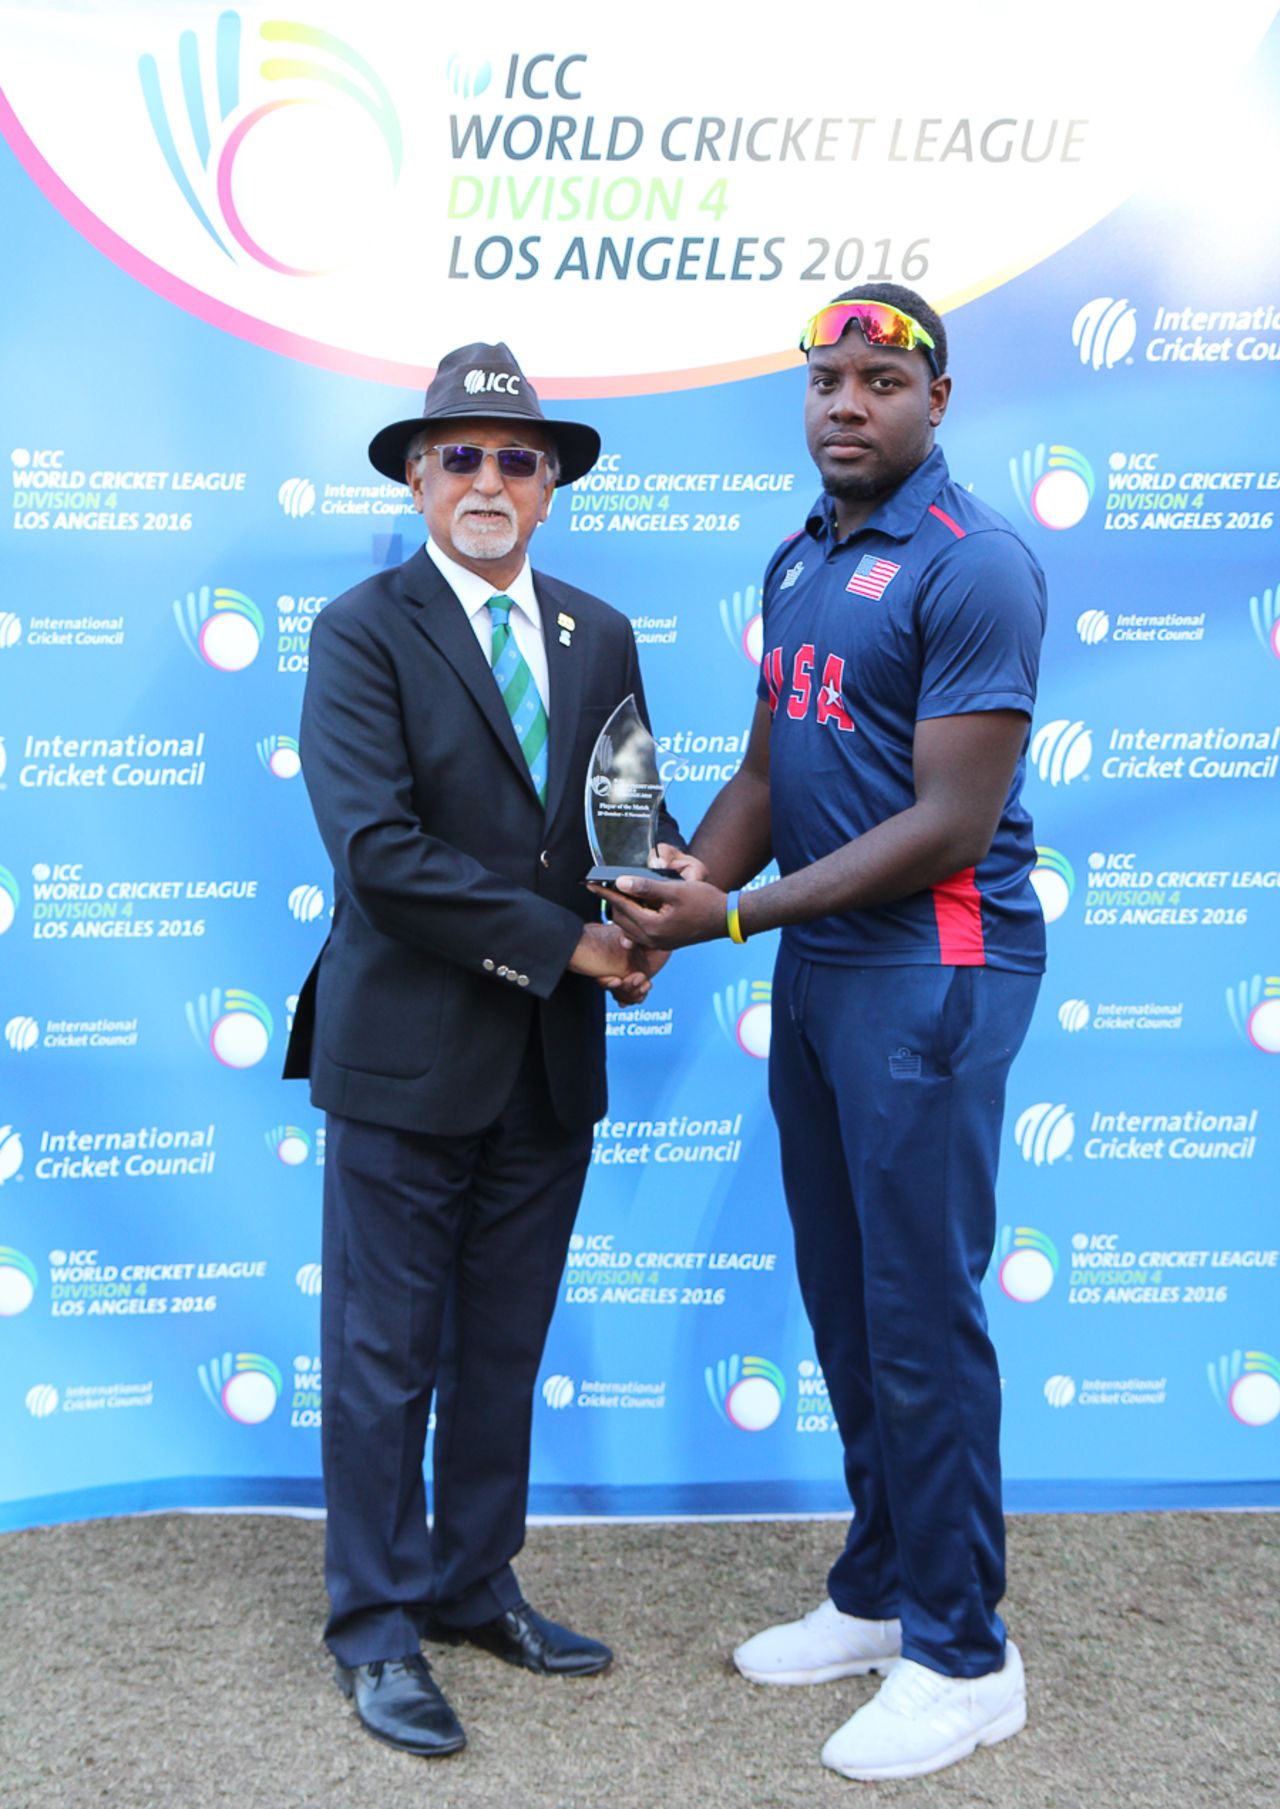 Steven Taylor receives his Man of the Match award from Dev Govindjee, USA v Oman, ICC World Cricket League Division Four, Los Angeles, November 1, 2016